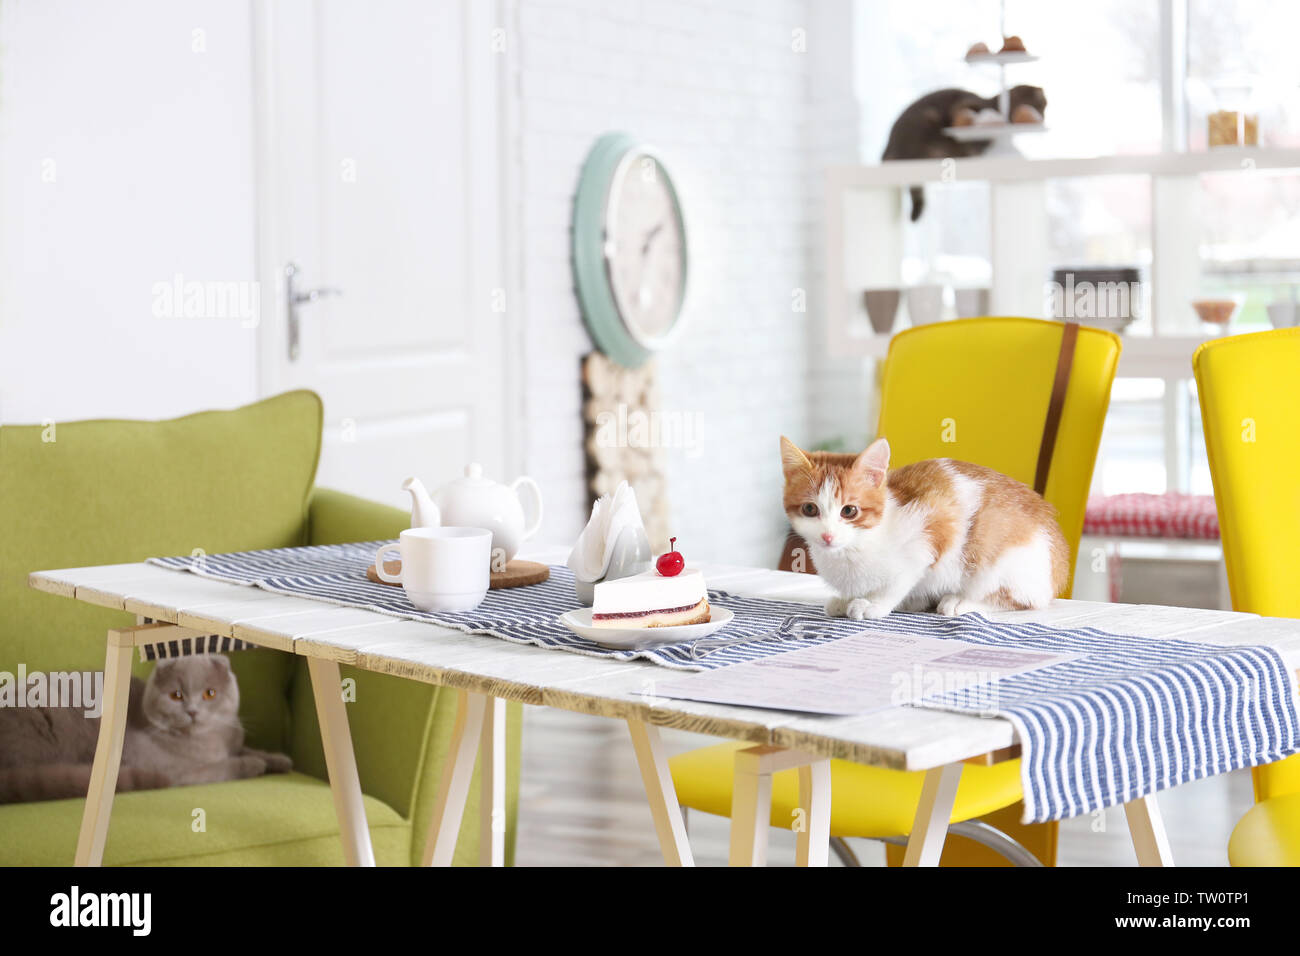 Cute cat on table served in modern cafe Stock Photo